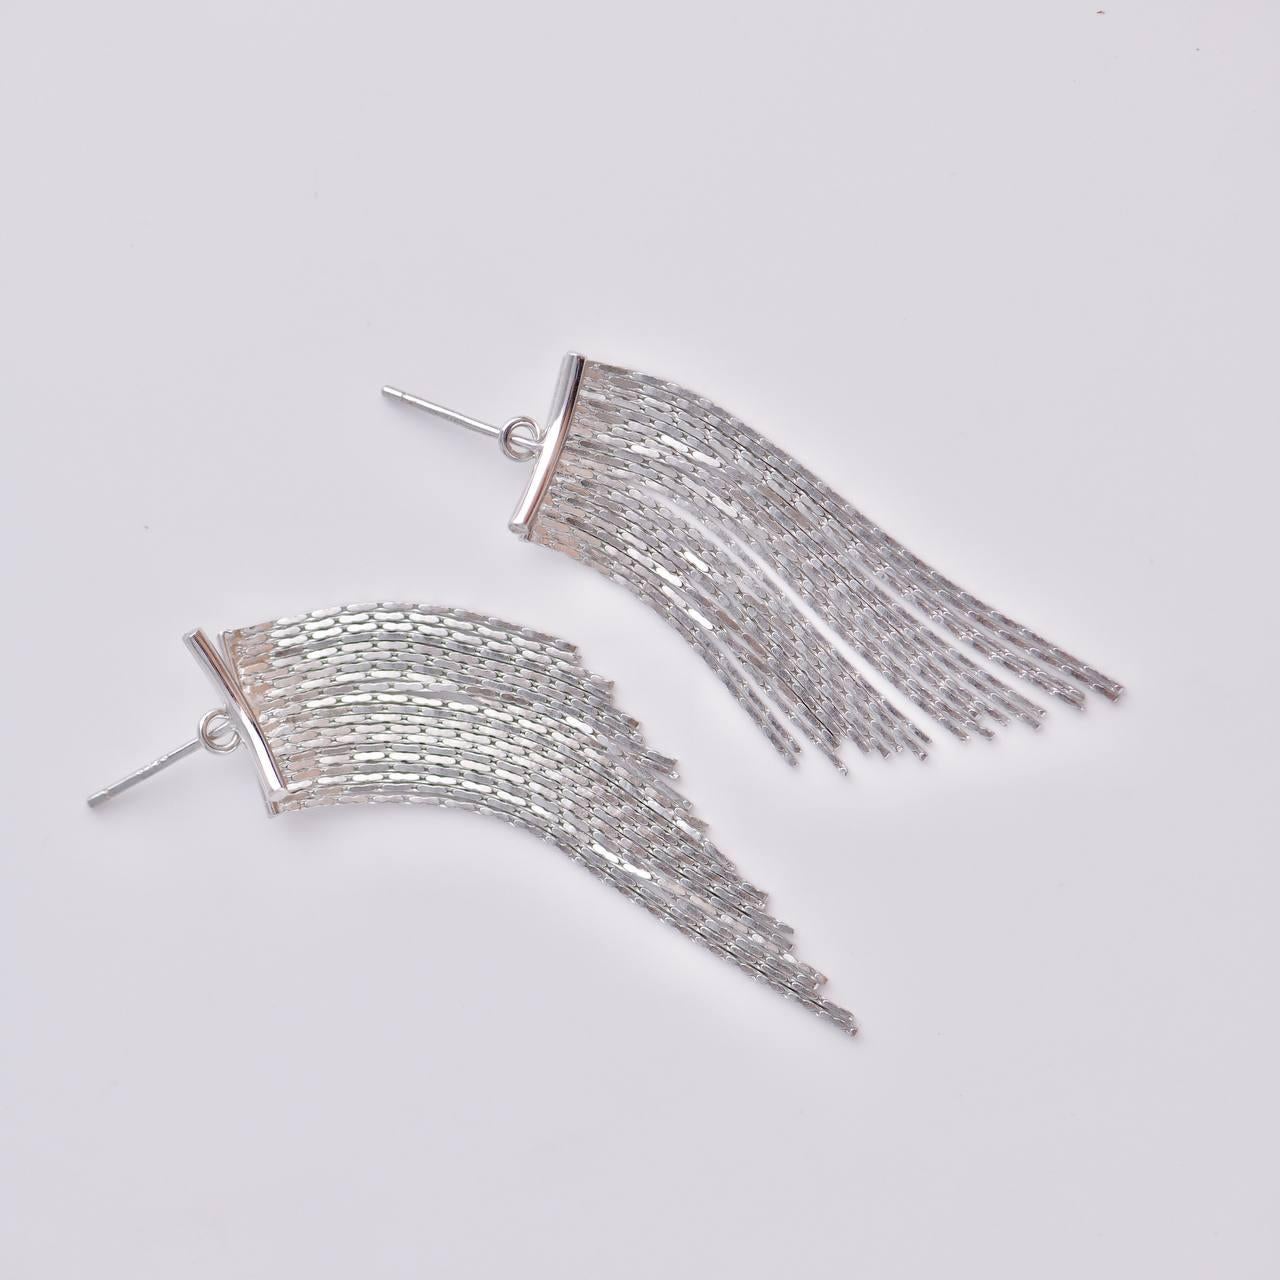 SKU: FT-0020
Material: 18K Gold Silver-Plated 925 Sterling Silver
Length: Approx. 4.3cm
